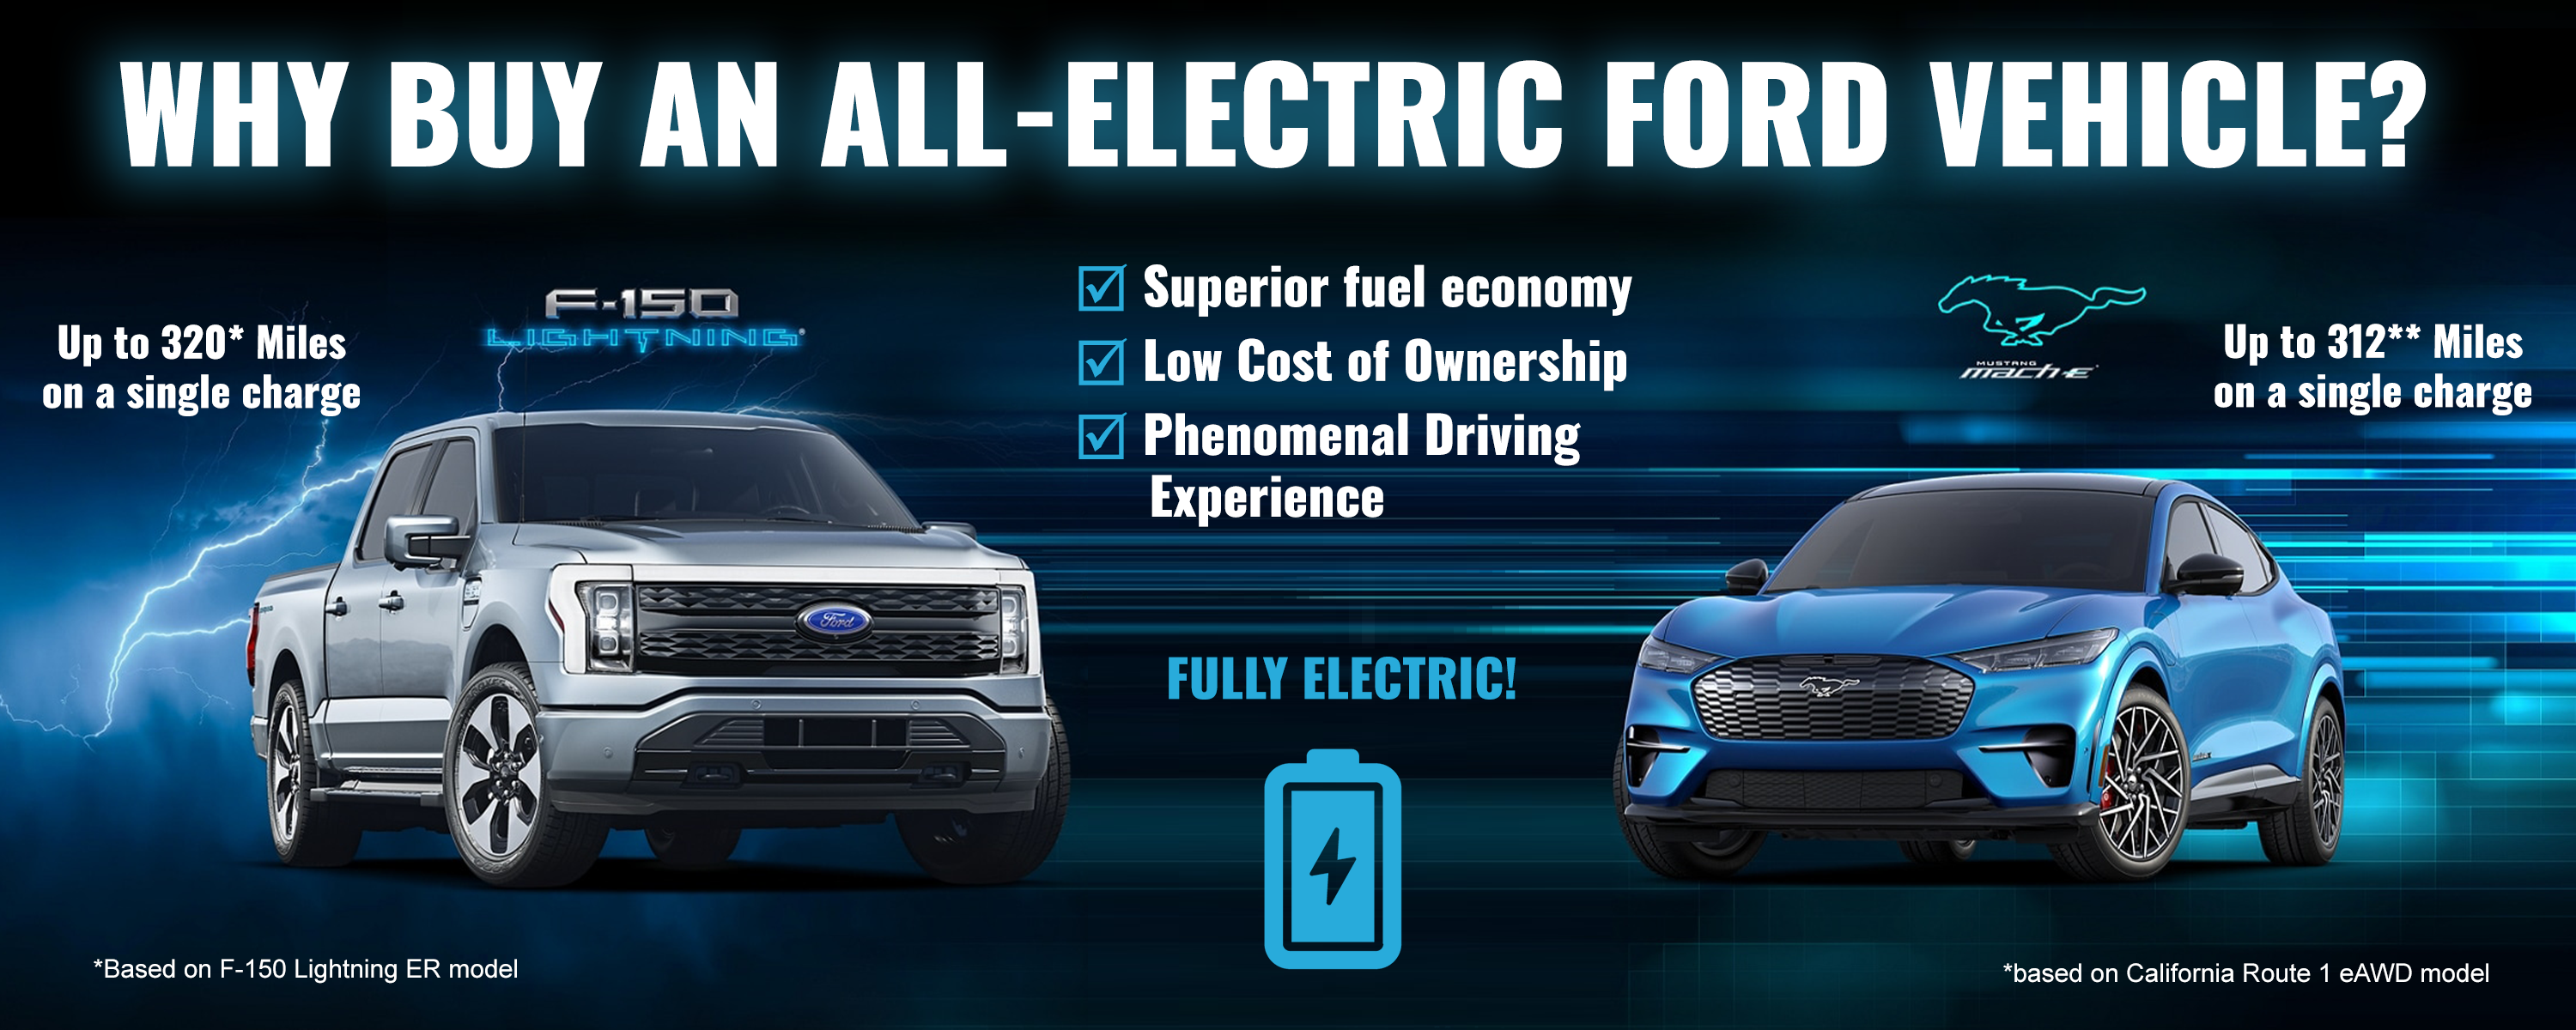 Why Buy An All-Electric Ford Vehicle?